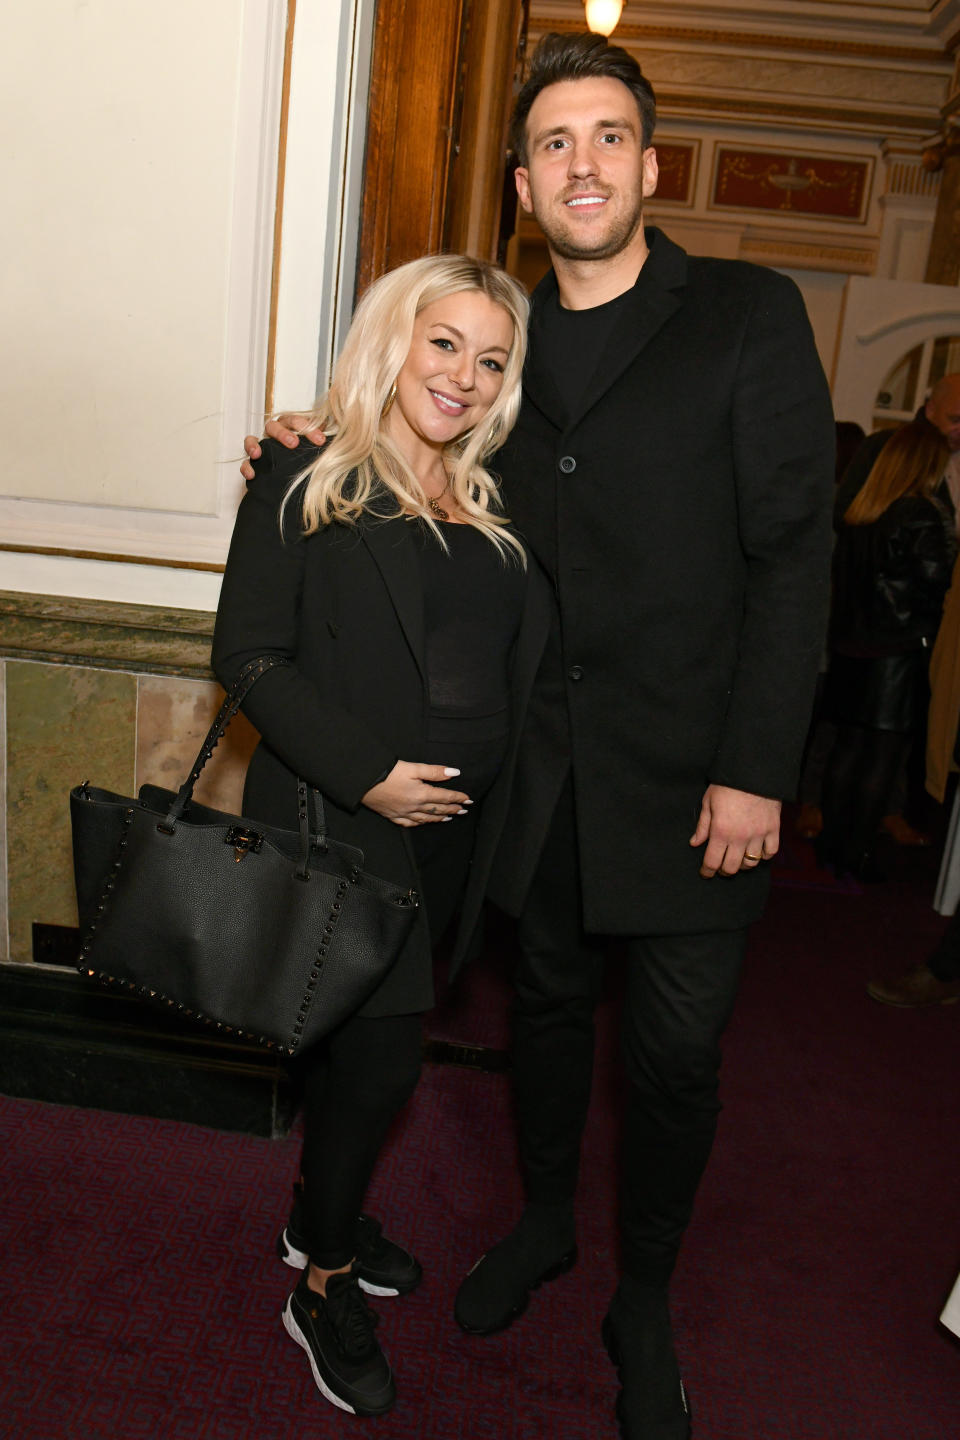 Sheridan Smith and Jamie Horn attend the Gala Charity Concert of &quot;The Pirate Queen&quot; in aid of Leukaemia UK at The London Coliseum on February 23, 2020 in London, England.  (Photo by David M. Benett/Dave Benett/WireImage)